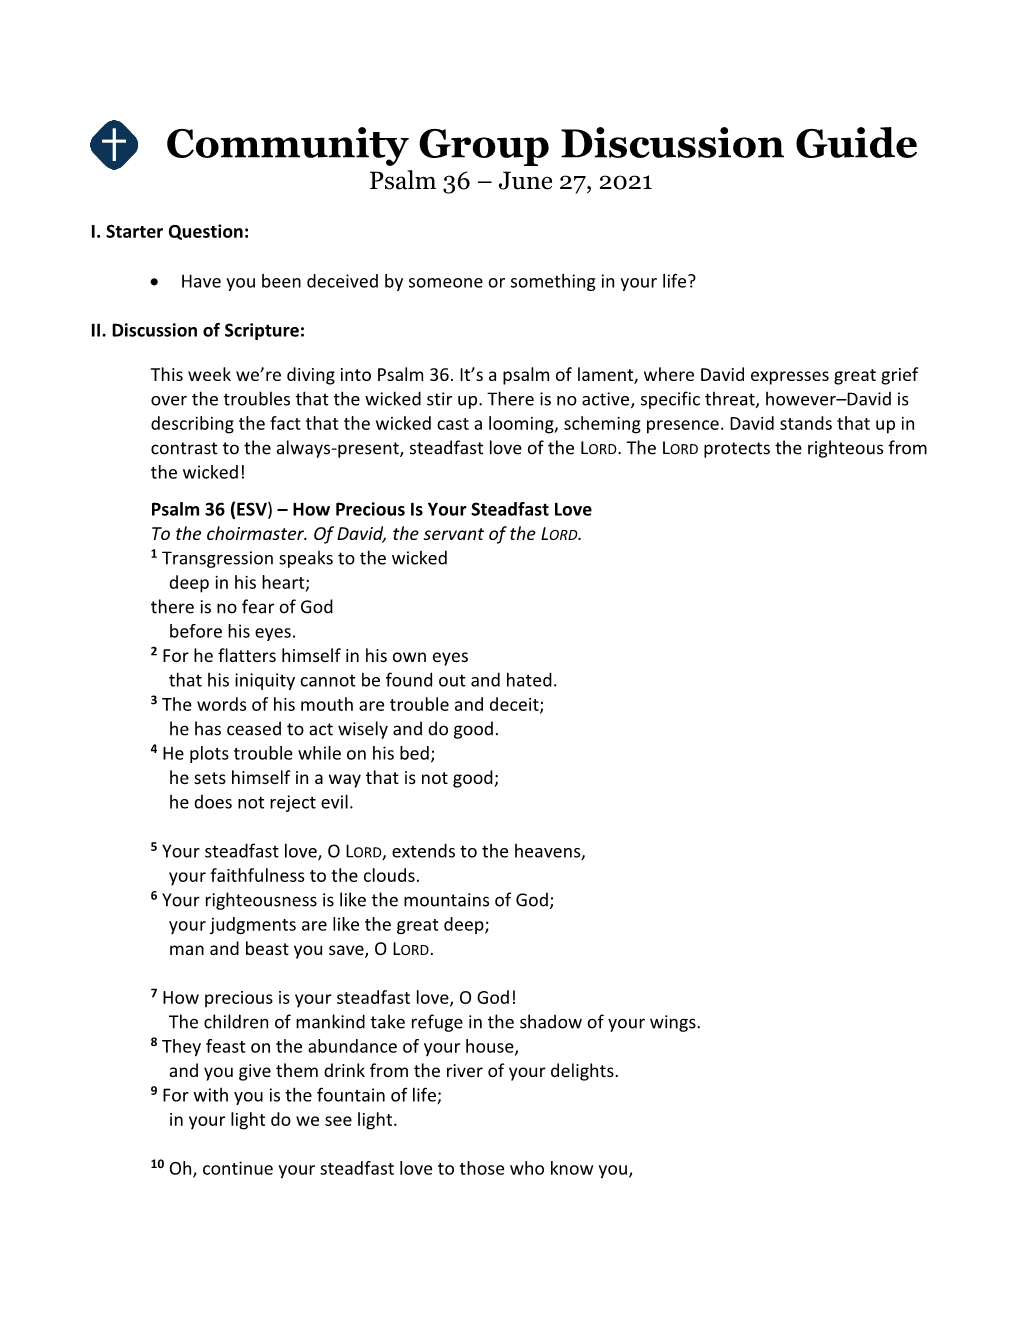 Community Group Discussion Guide Psalm 36 – June 27, 2021